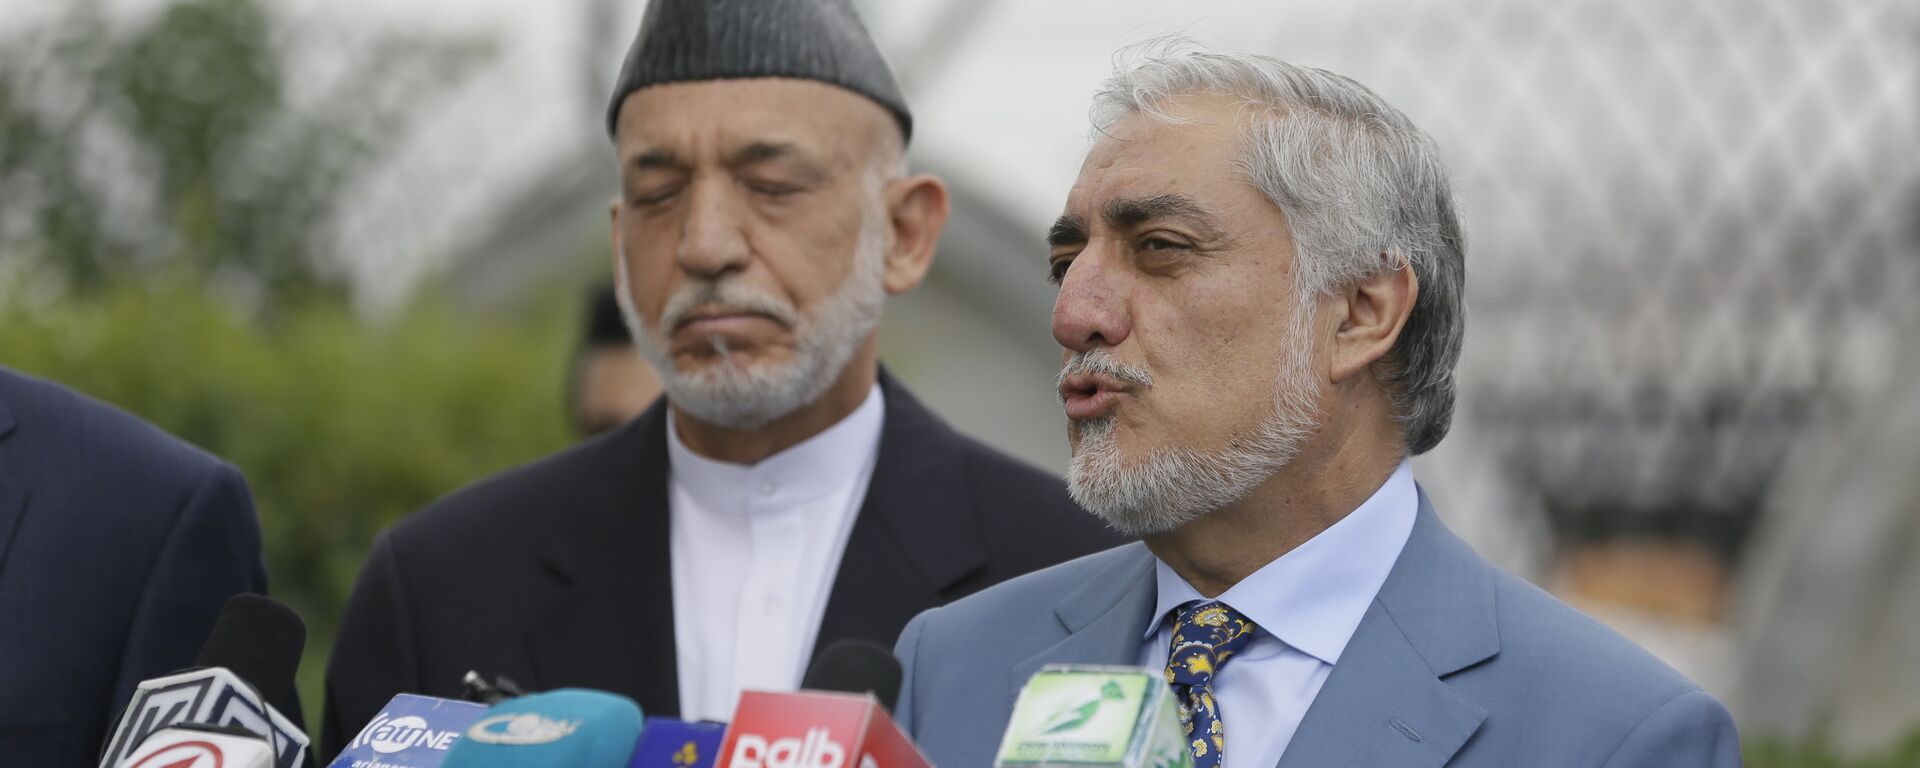 Abdullah Abdullah, head of Afghanistan's National Reconciliation Council talks about peace negotiation at the news conference at Hamid Karzai International Airport, in Kabul, Afghanistan, Friday, July. 16, 2021. - Sputnik International, 1920, 18.08.2021